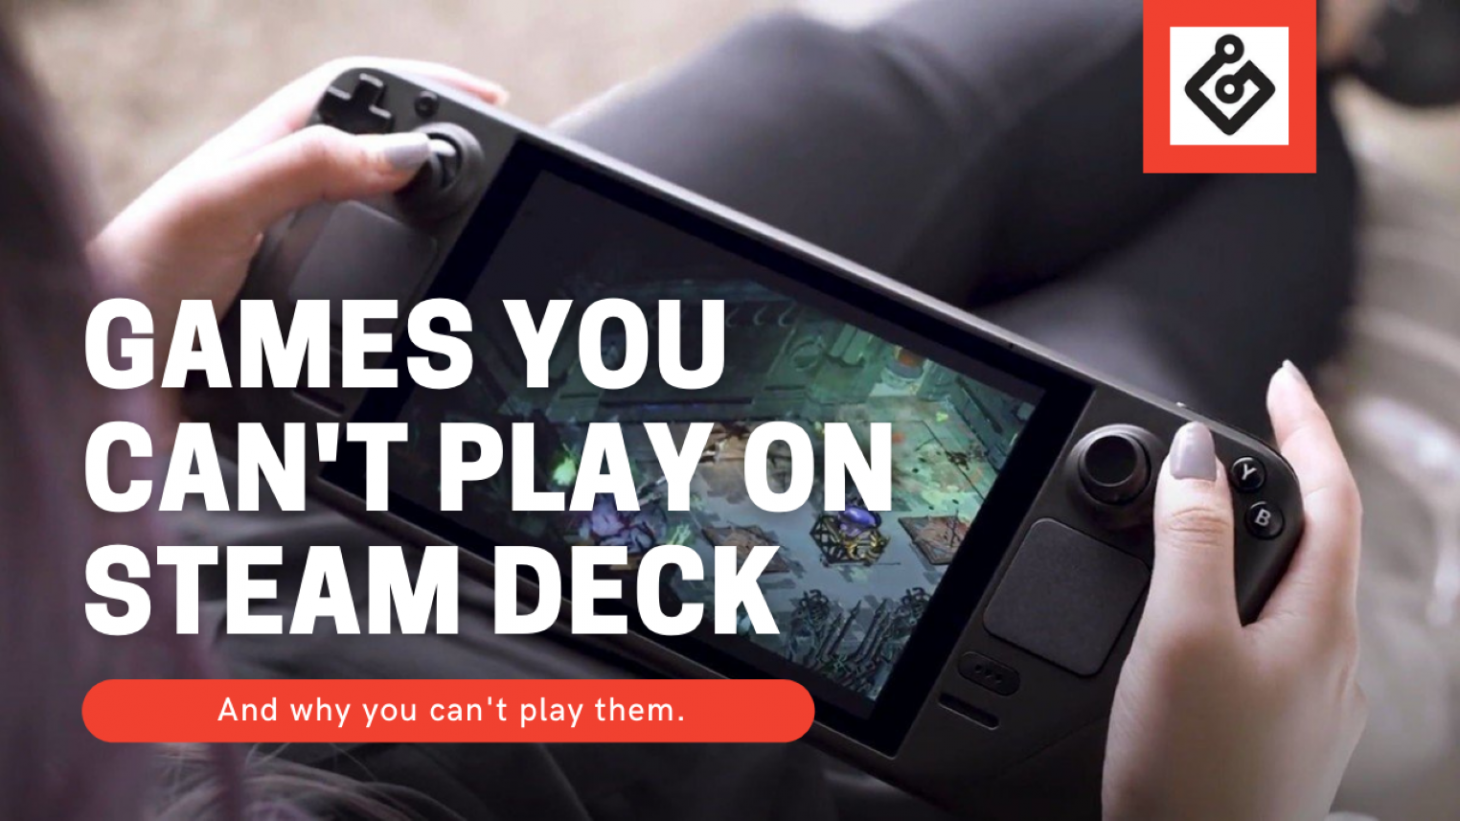 Valve's Steam Deck Will Let You Shop On Epic Games Store